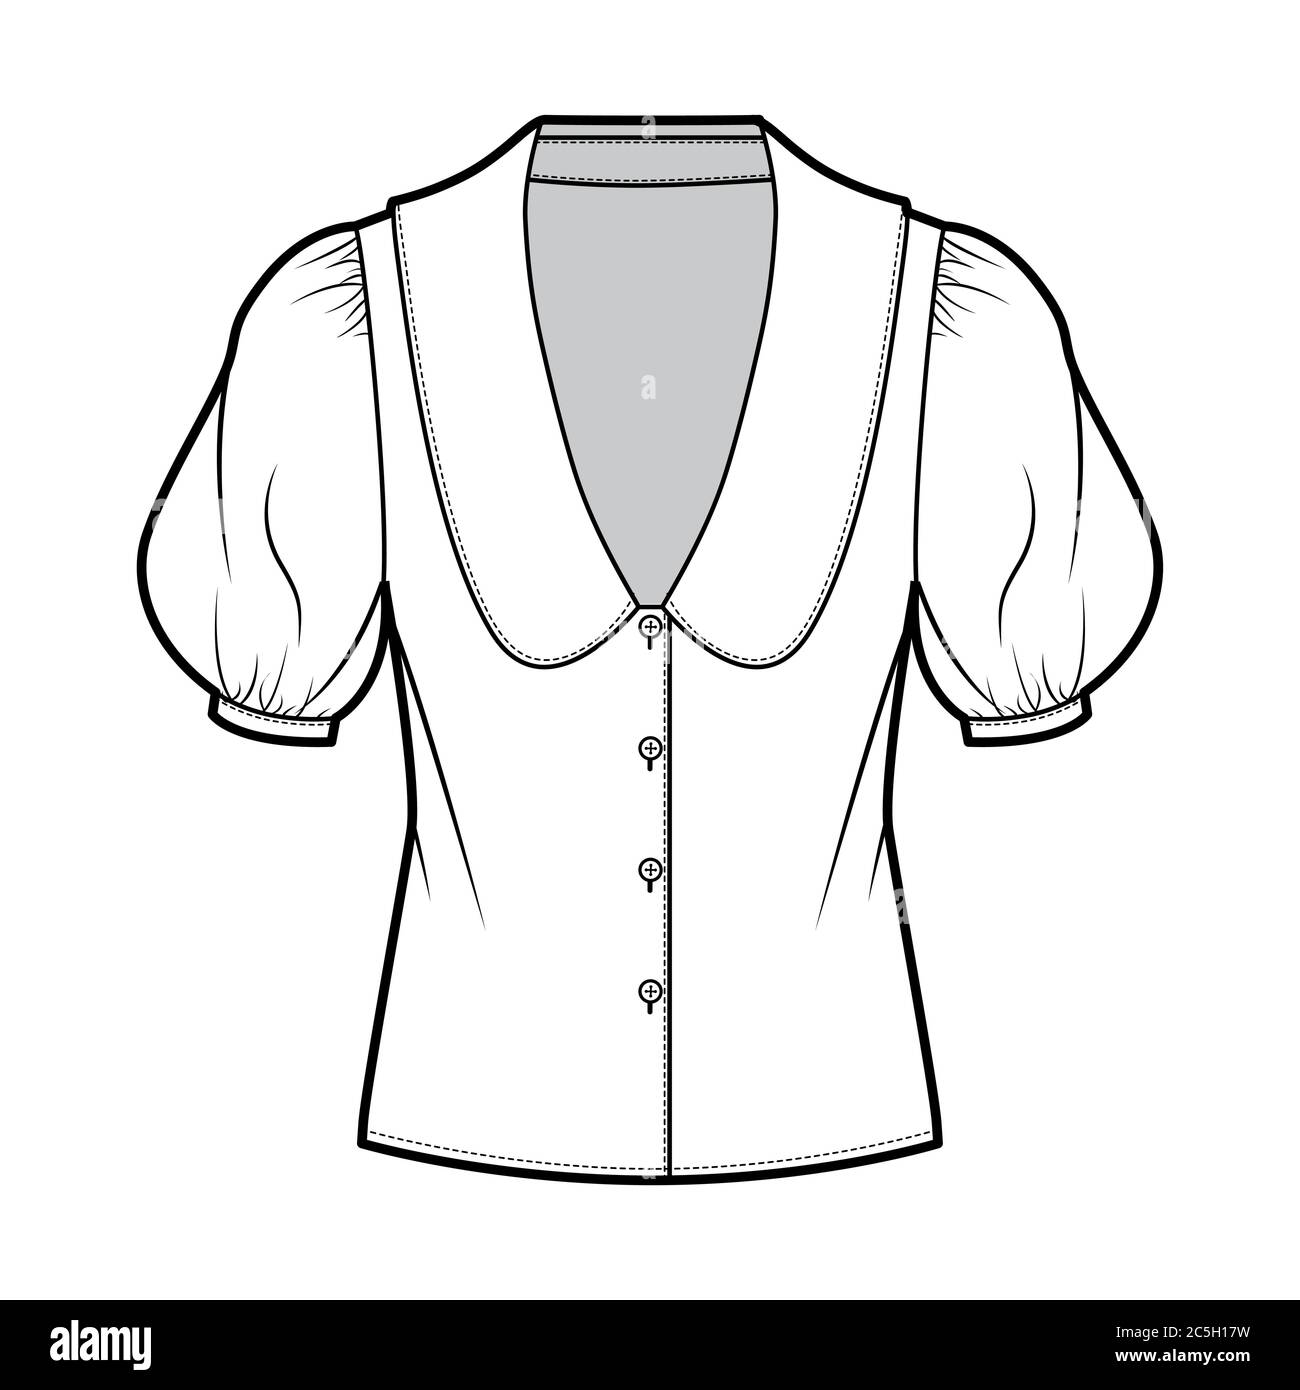 Blouse technical fashion illustration with collar framing V neck, oversized medium puffed sleeves and body. Flat apparel template front, white color. Women, men unisex garment CAD mockup for designer Stock Vector